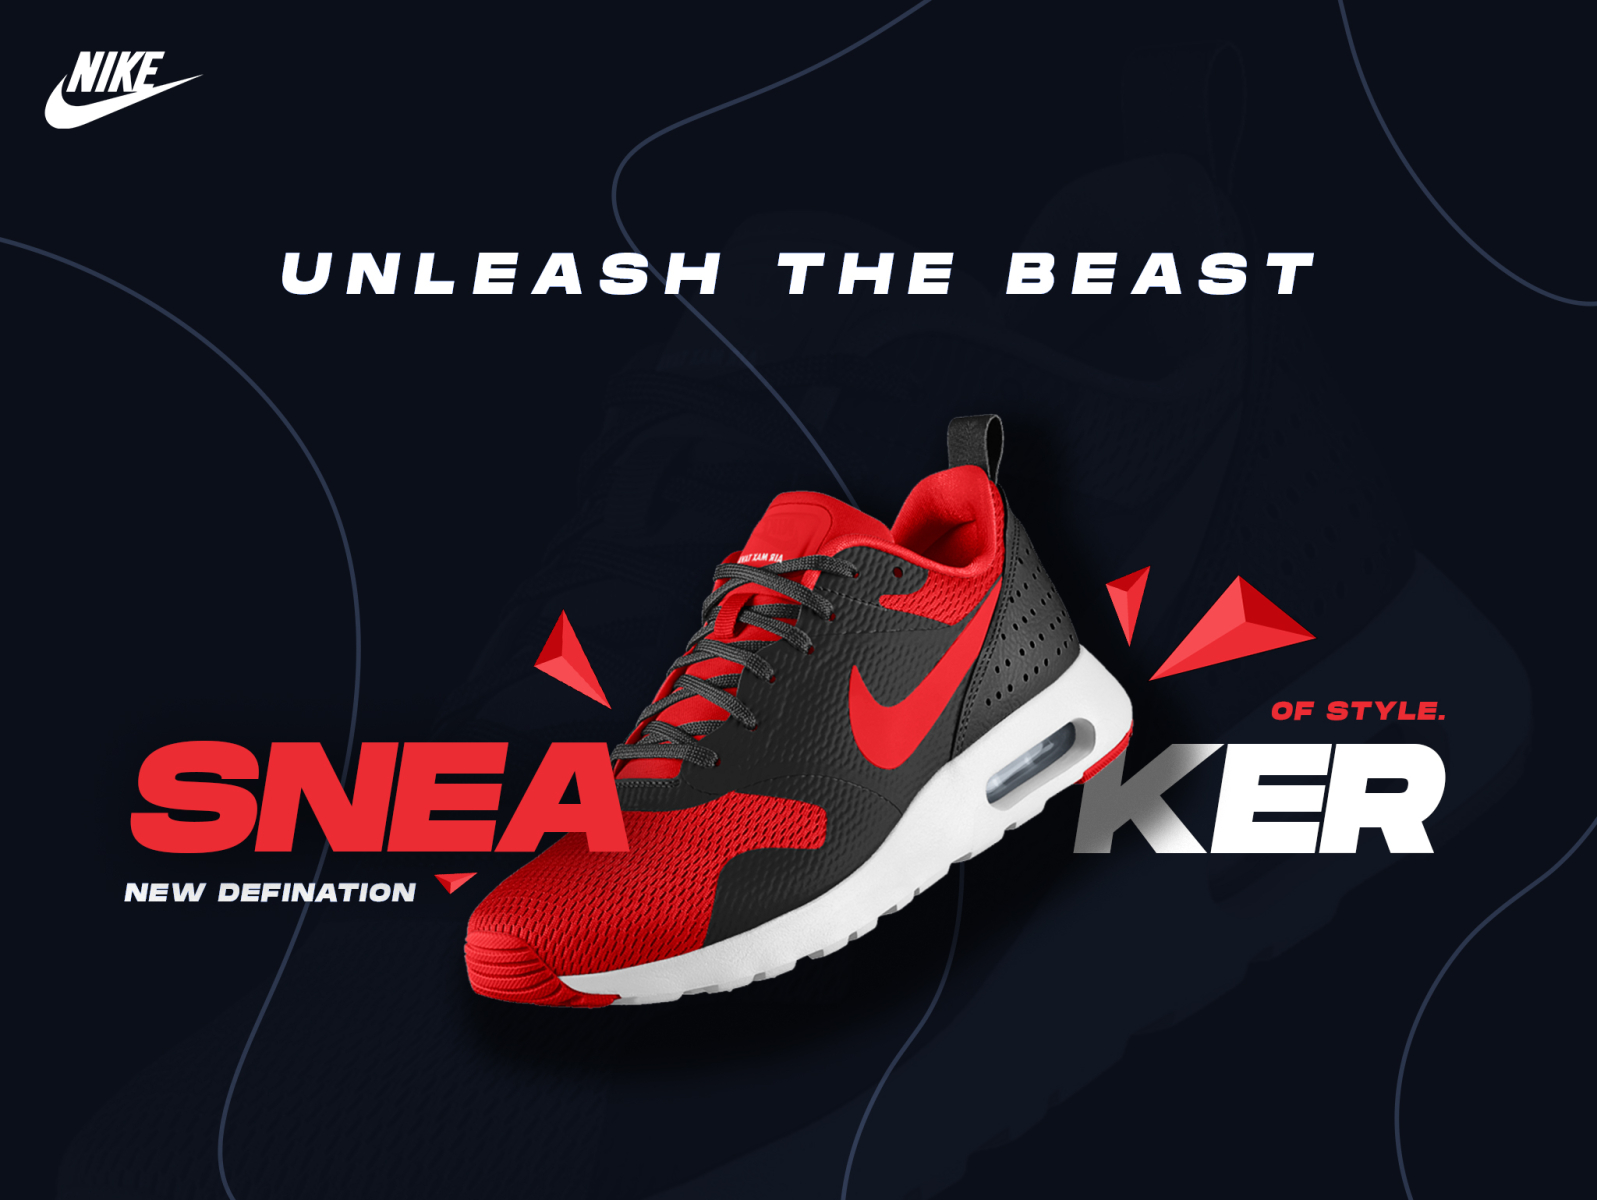 Nike Shoe Poster by Shakil Ansary on Dribbble